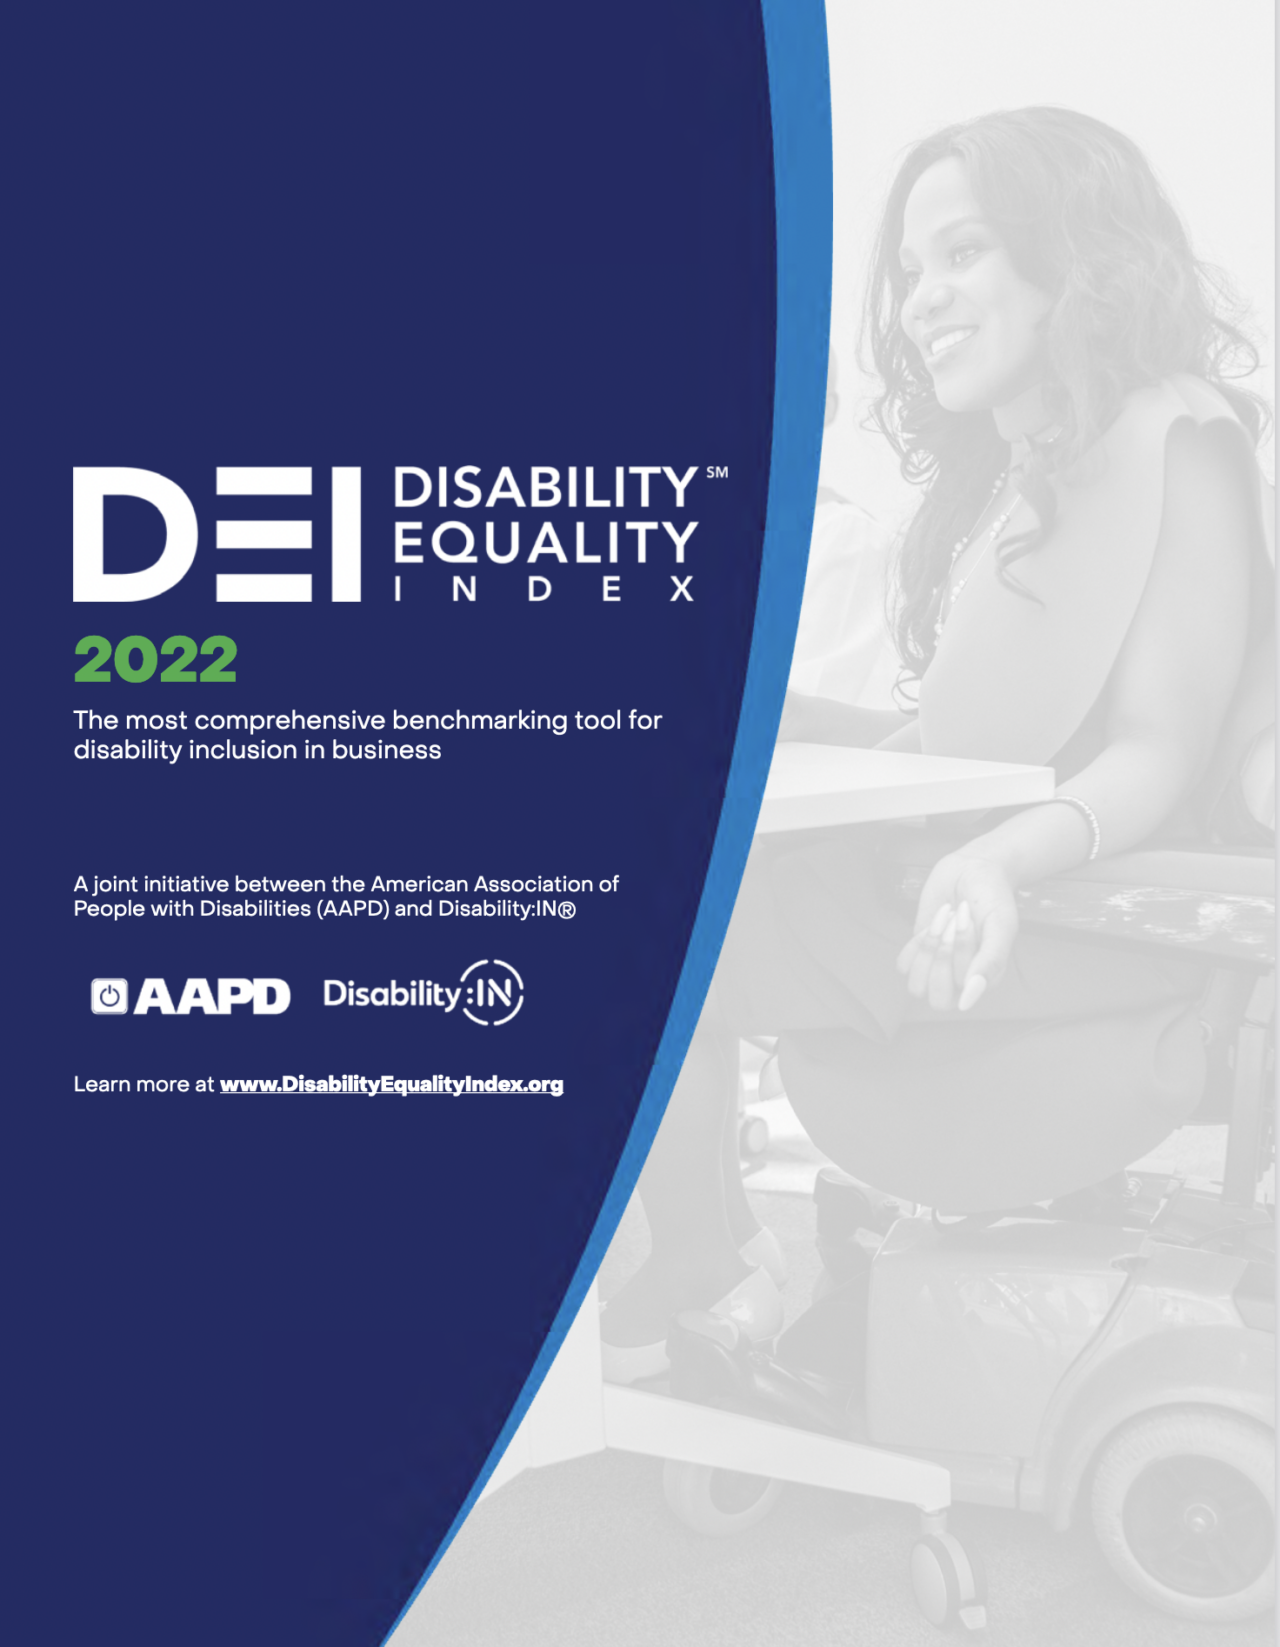 Disability Equality Index 2022 AAPD